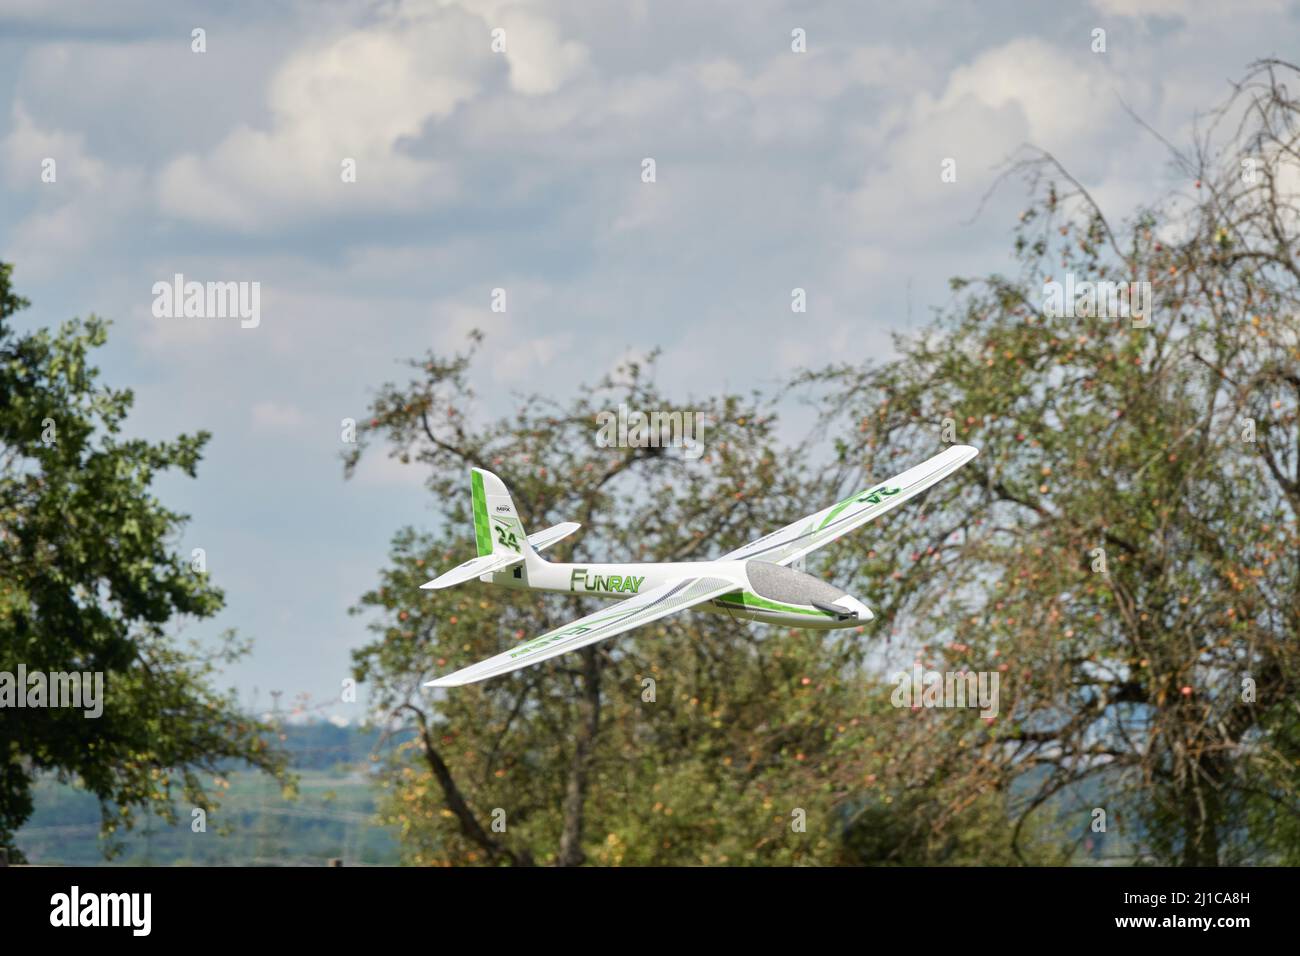 Notzingen, Germany - August 15, 2020: View of the motorized model building Glider Funray, from the manufacturer Multiplex. Stock Photo